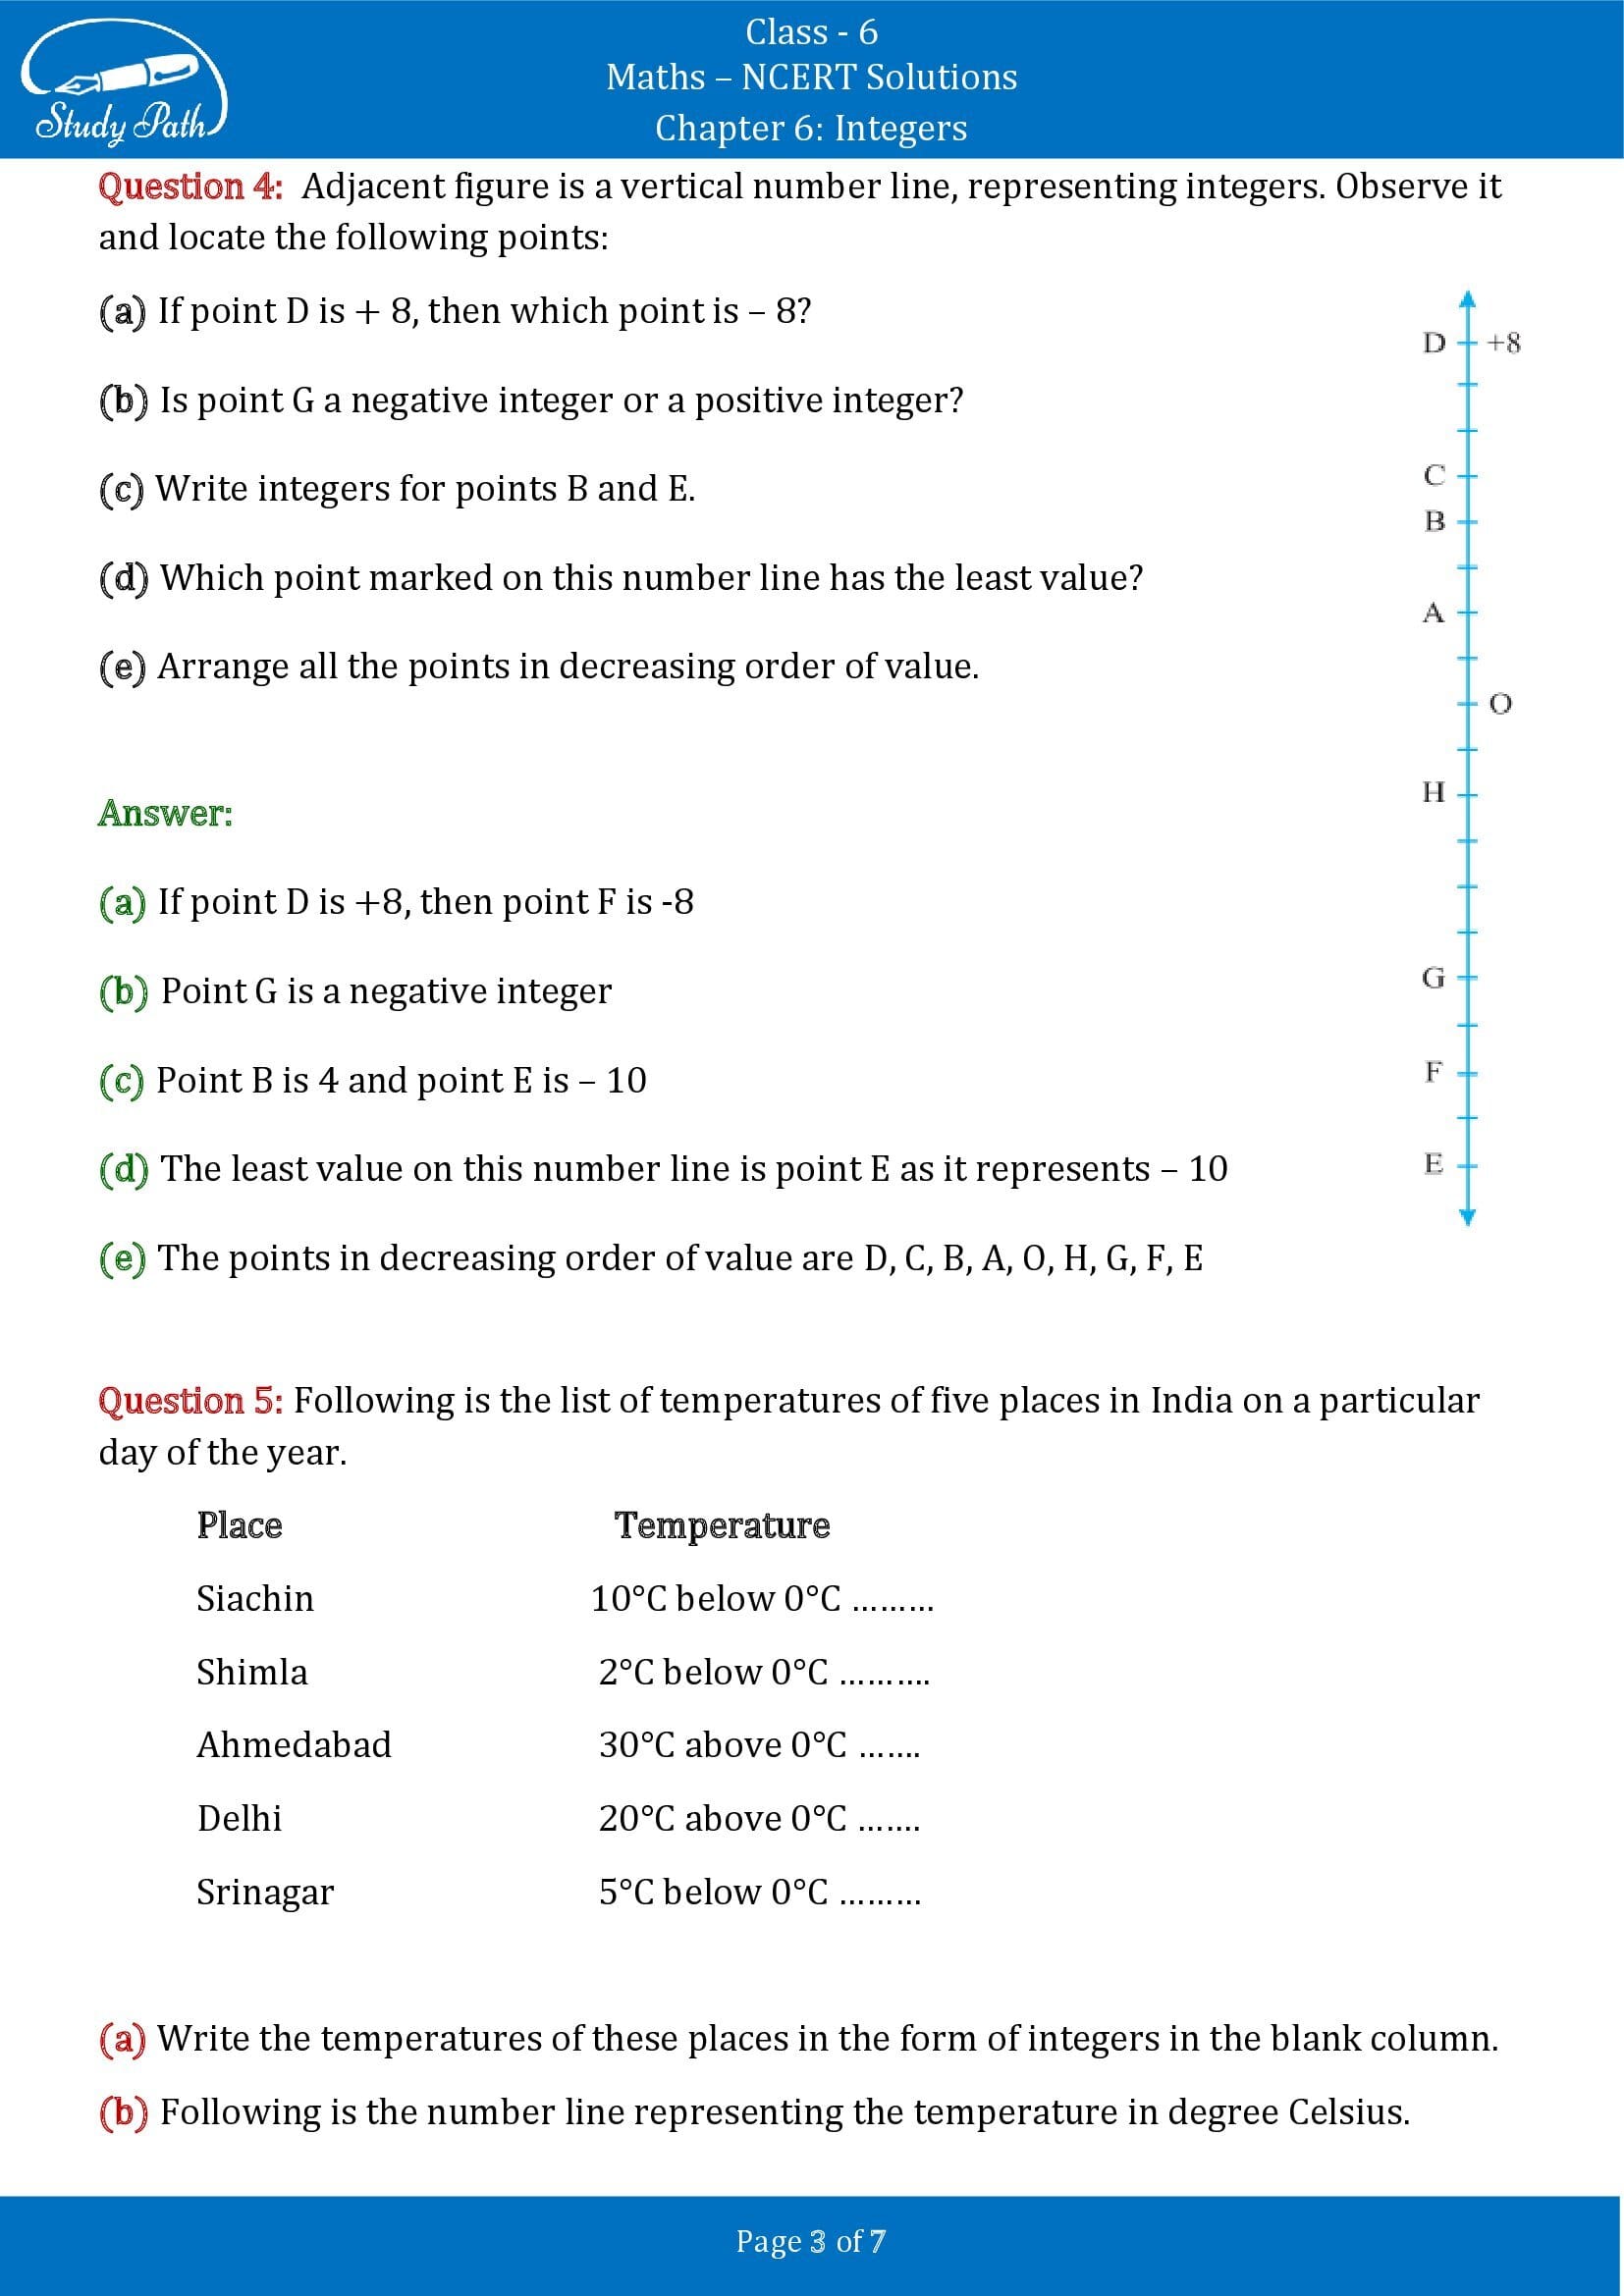 NCERT Solutions for Class 6 Maths Chapter 6 Integers Exercise 6.1 00003